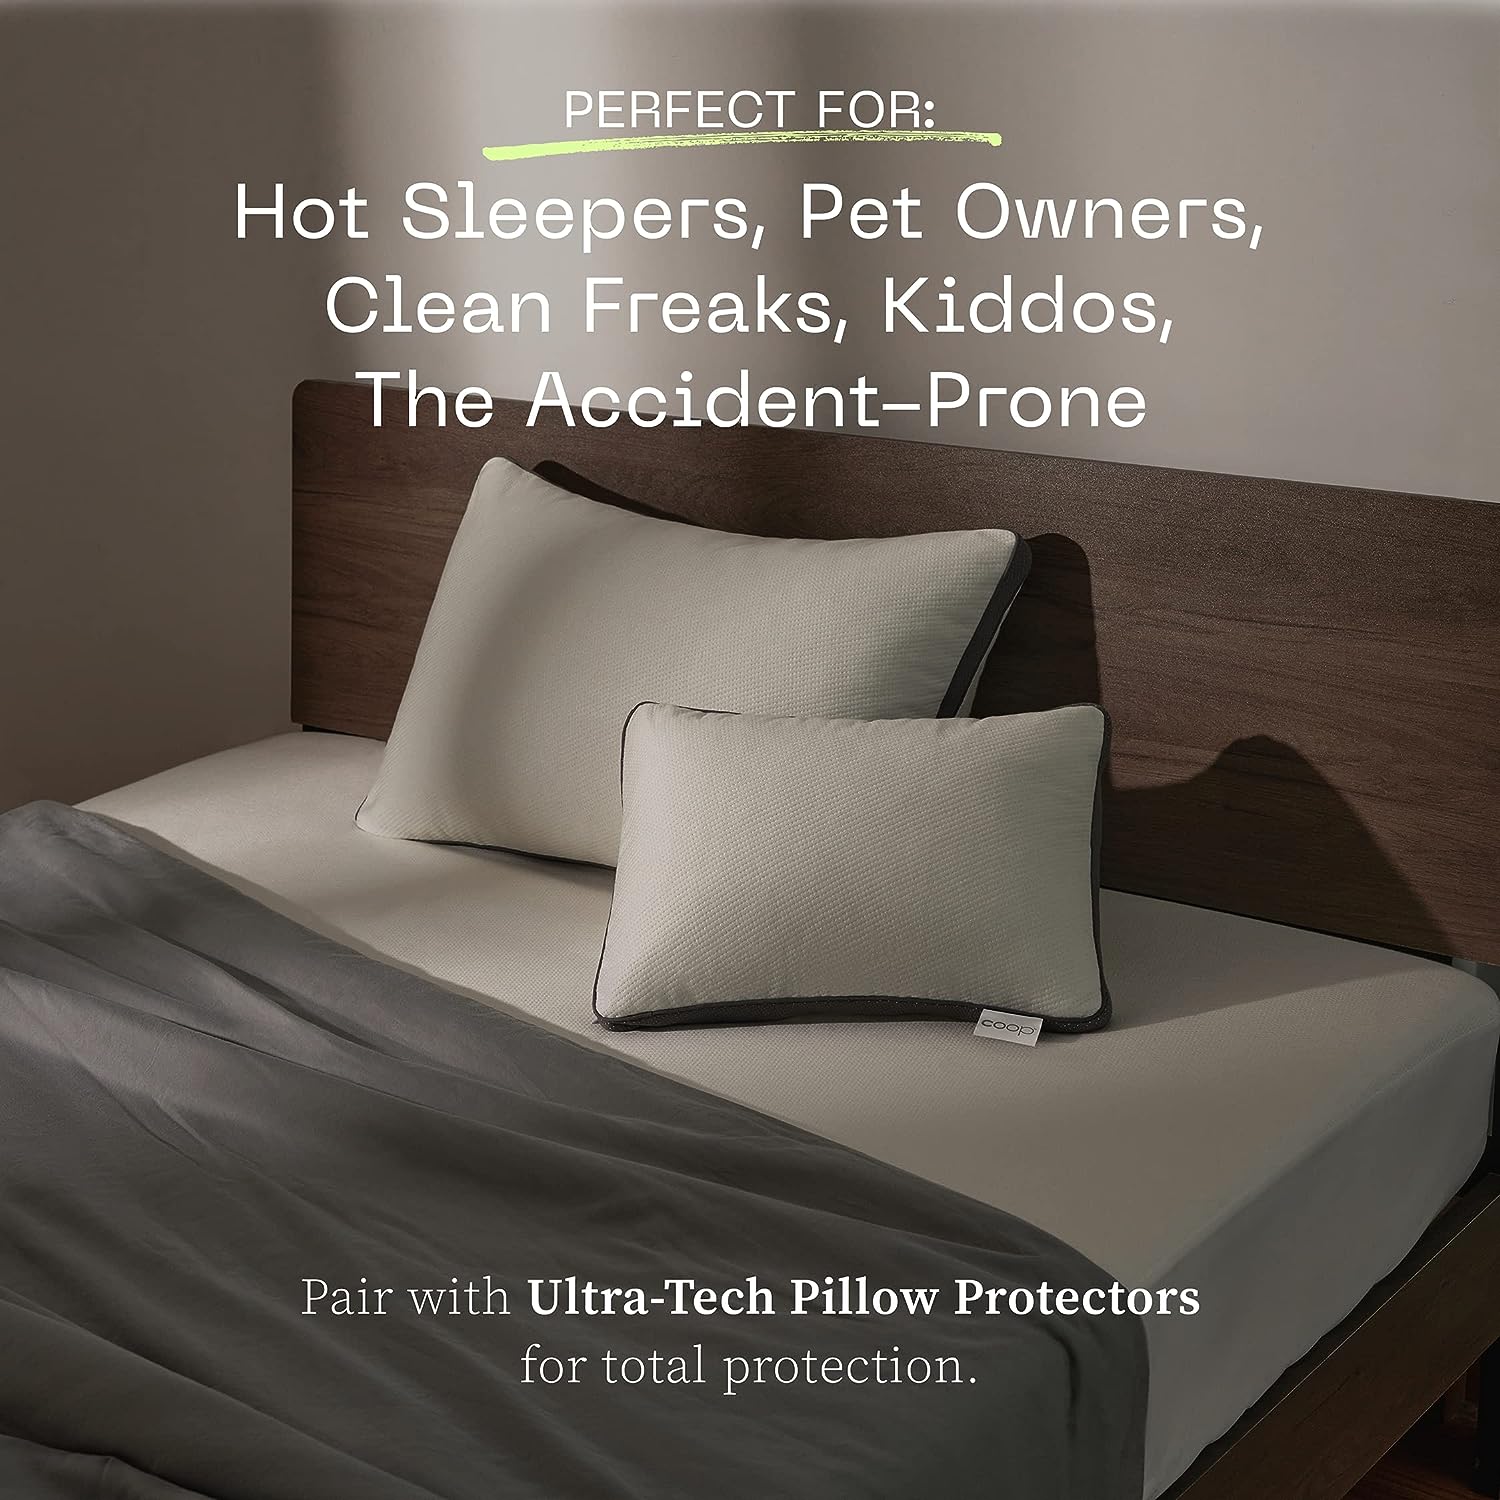 SureGuard Full Extra Long (XL) Mattress Protector - 100% Waterproof, Hypoallergenic - Premium Fitted Cotton Terry Cover